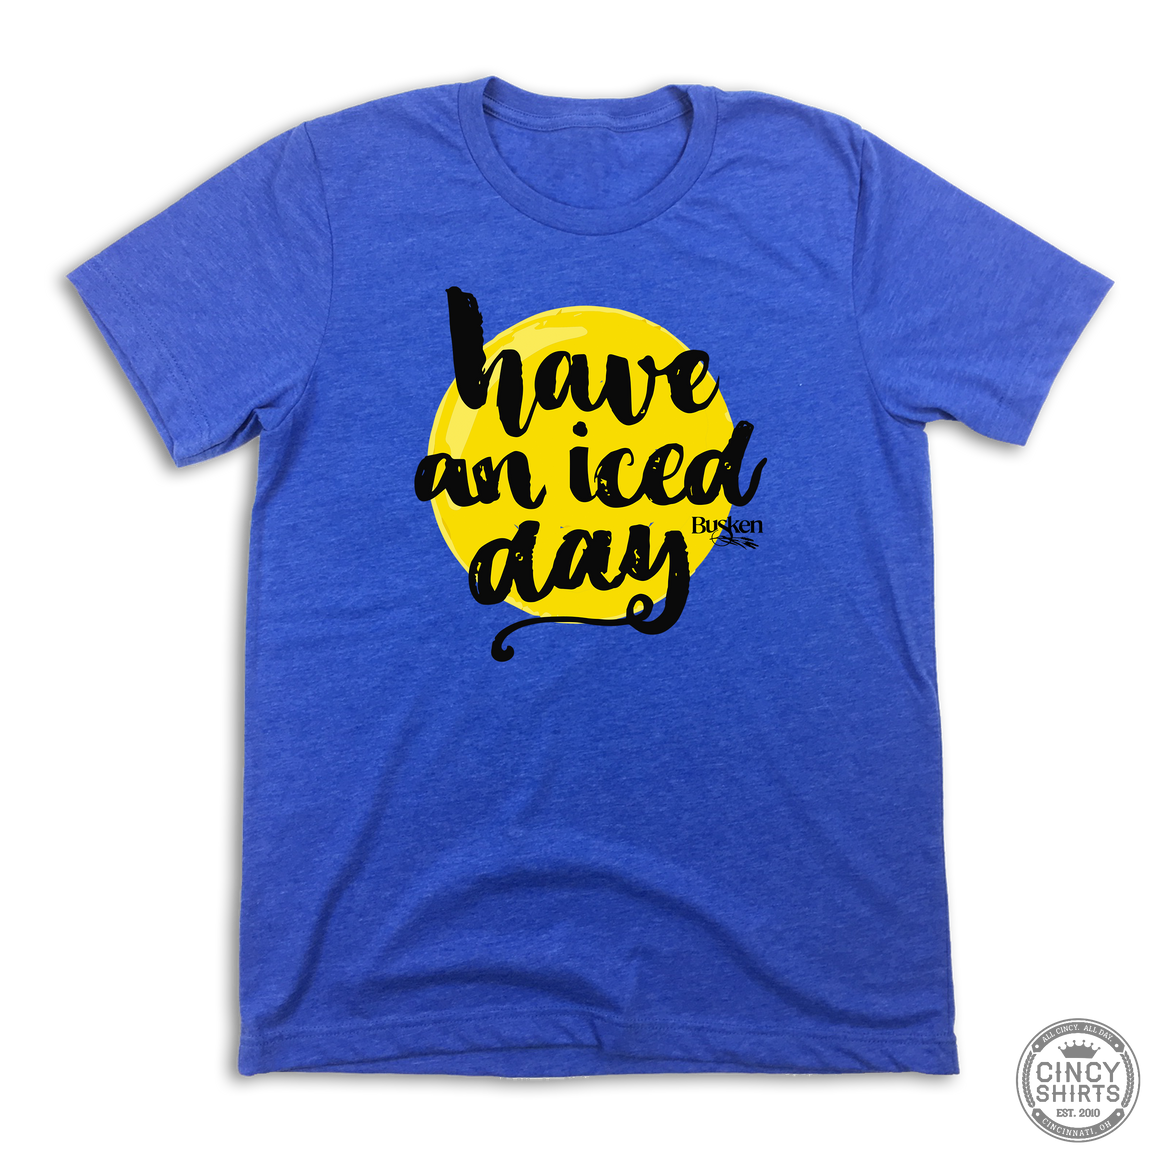 Have an Iced Day - Cincy Shirts